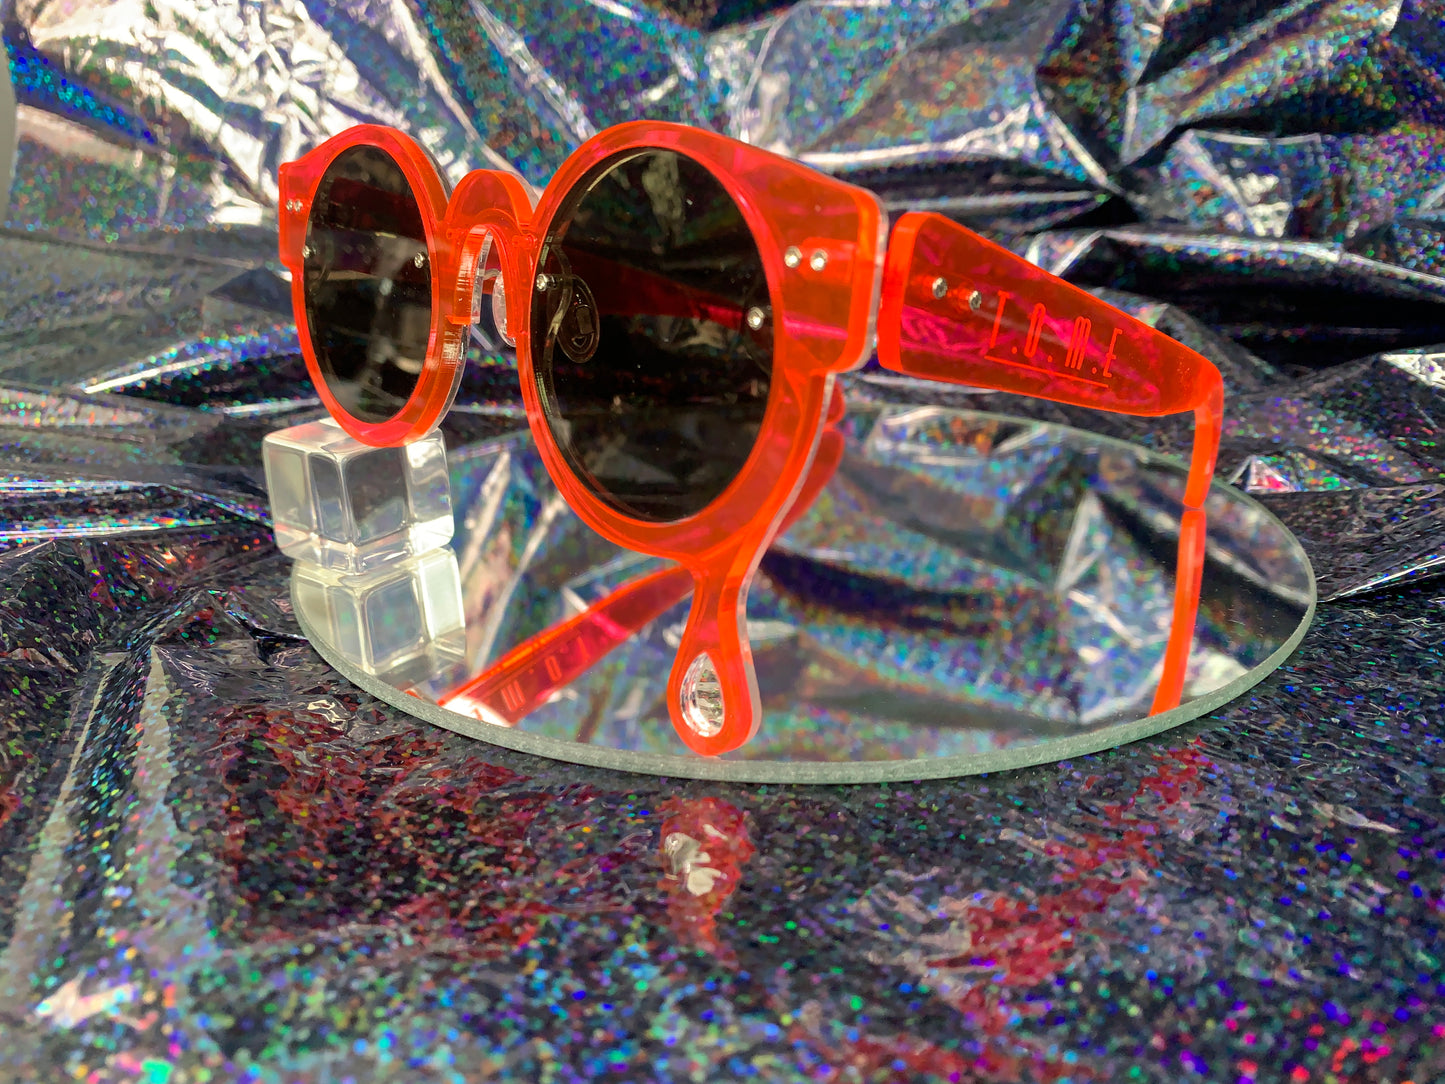 A side view of acrylic laser cut sunglasses with a teardrop accent dripping down the right side of the glasses with the brand logo T.O.M.E. etched on the temple. The color of the sunglasses shown are neon pink.